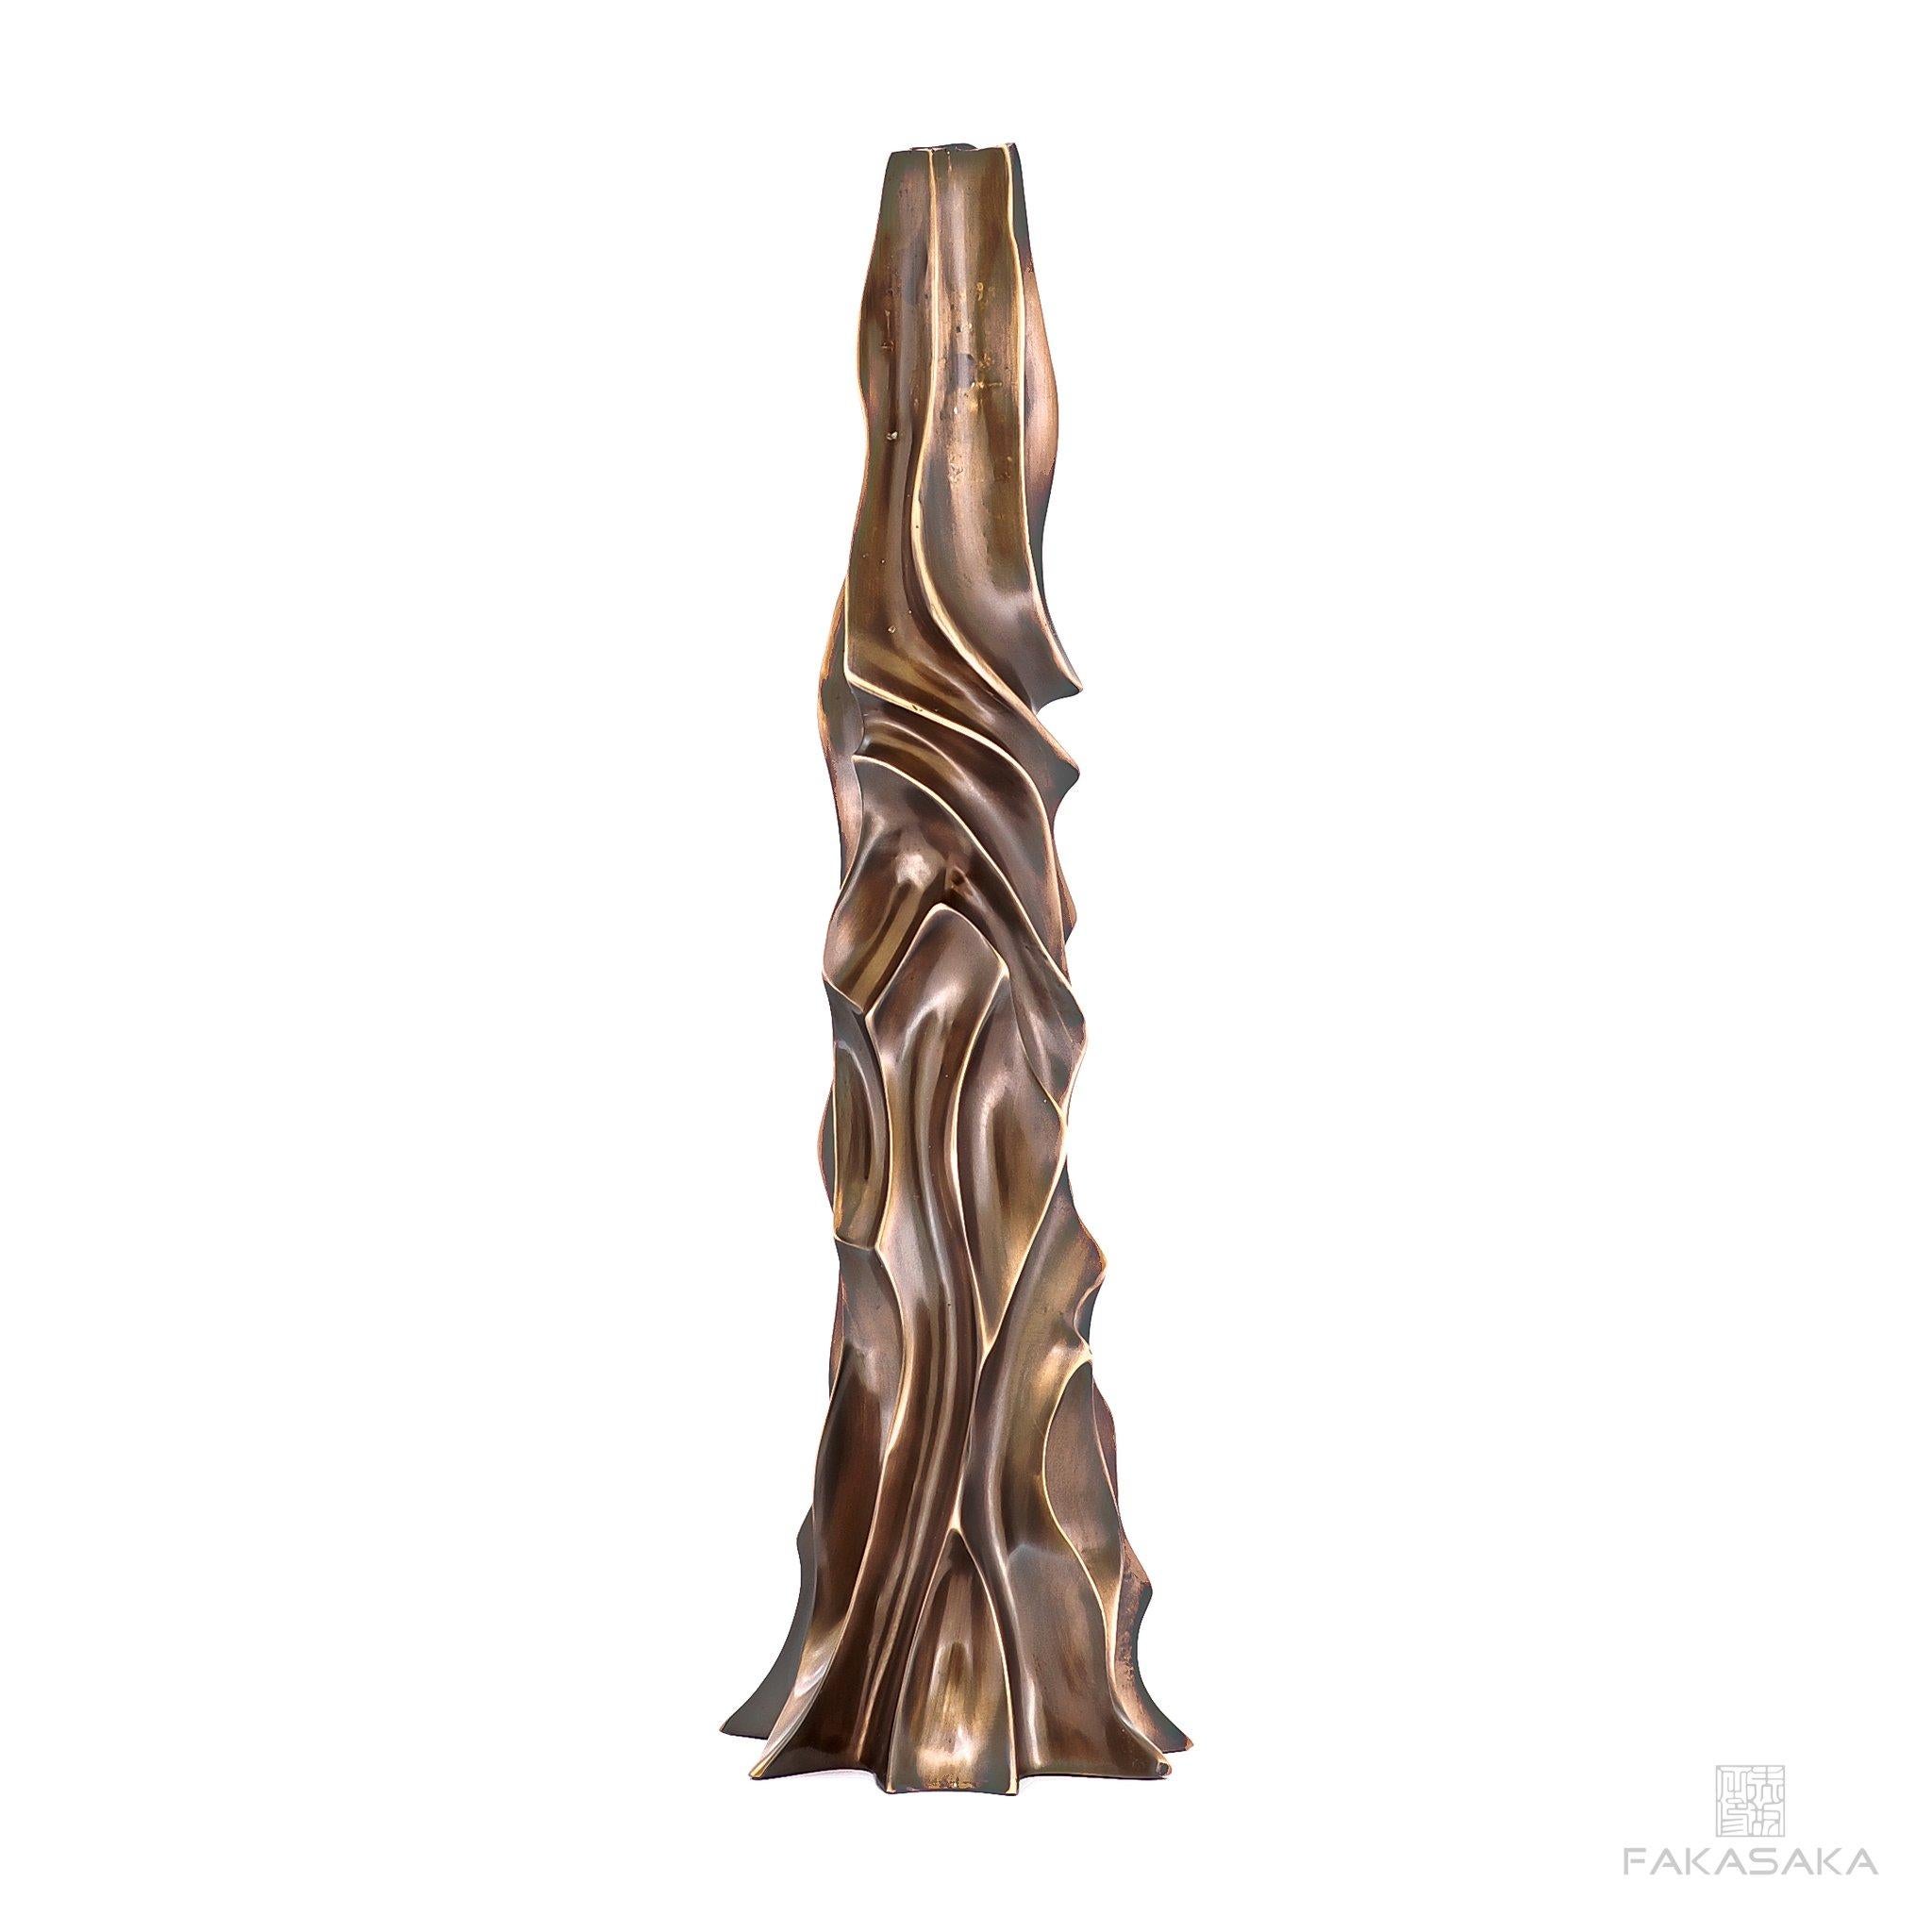 Candleholder in dark bronze by Fakasaka Design
Dimensions: W 13.5 x D 13.5 x H 41.5 cm
Materials: Finished in polished bronze.

Also available in polished bronze.